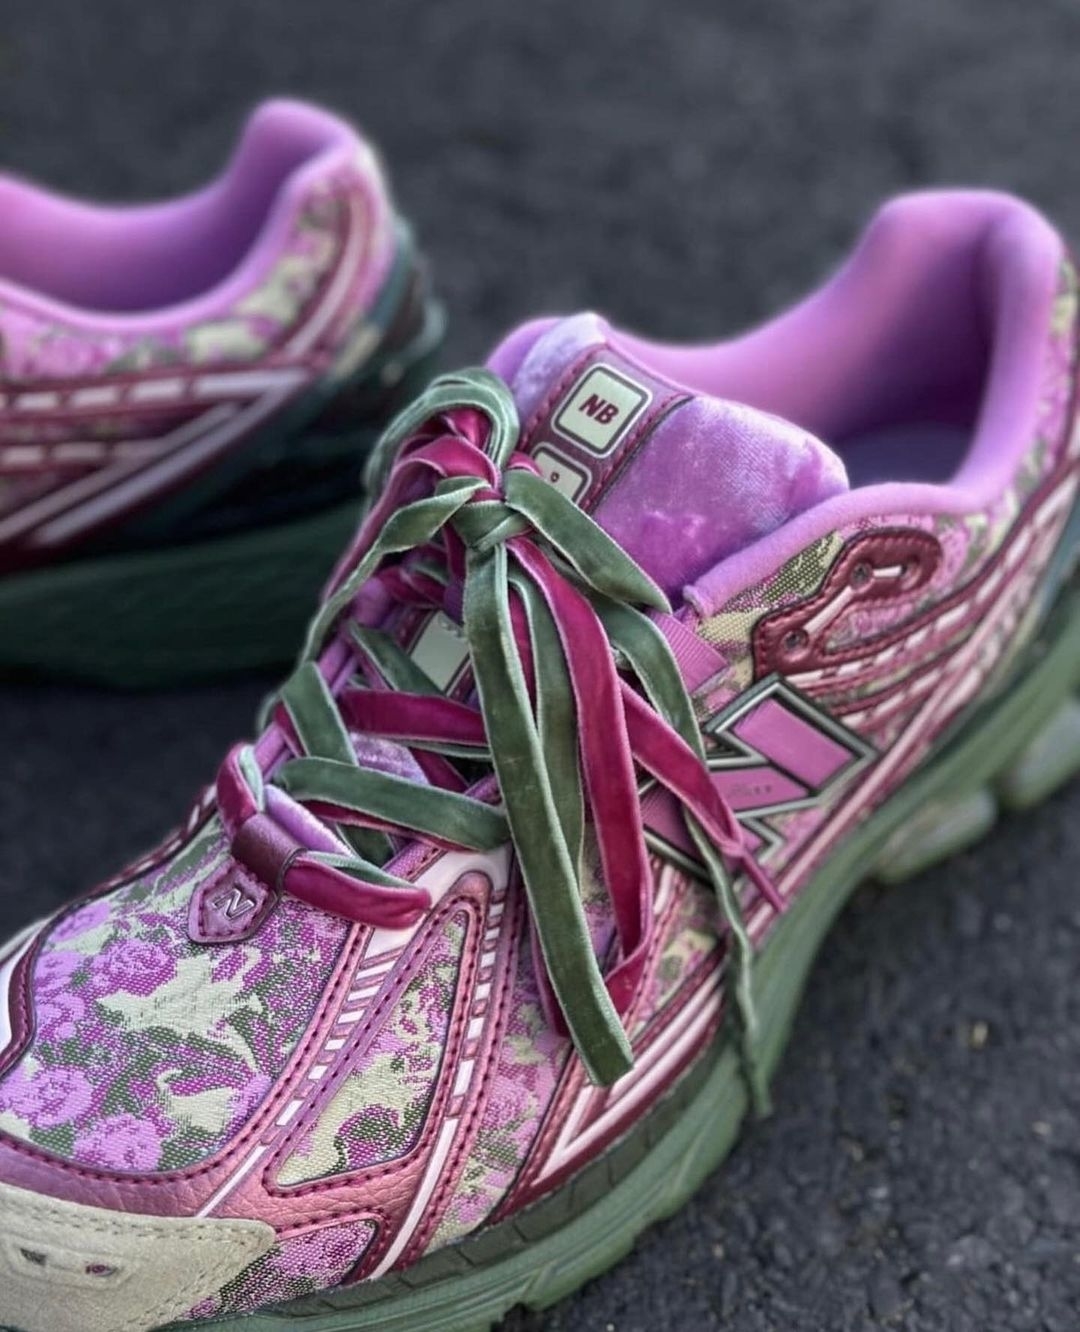 A pair of worn purple and green sneakers with elaborate patterns on pavement